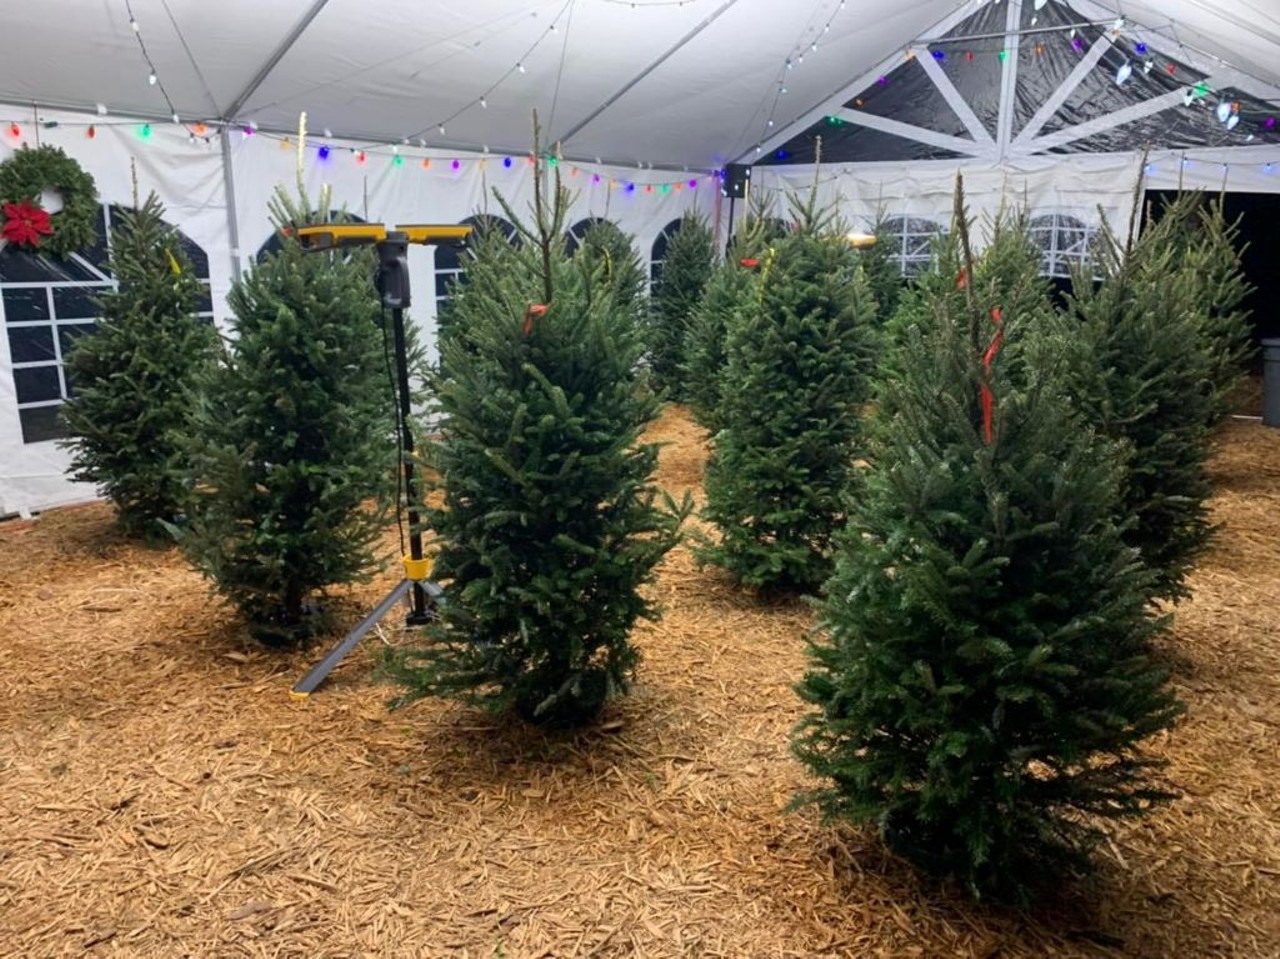 Holly Jolly Meadows Christmas Tree Farm 
321-328-8951, 4705 Meadow Green Road, Mims
Although this is Holly Jolly&#146;s first Christmas tree season, don&#146;t discount their premium Christmas trees. Wreaths and mini trees are also available. 
Photo via Holly Jolly Meadows Christmas Tree Farm/Facebook